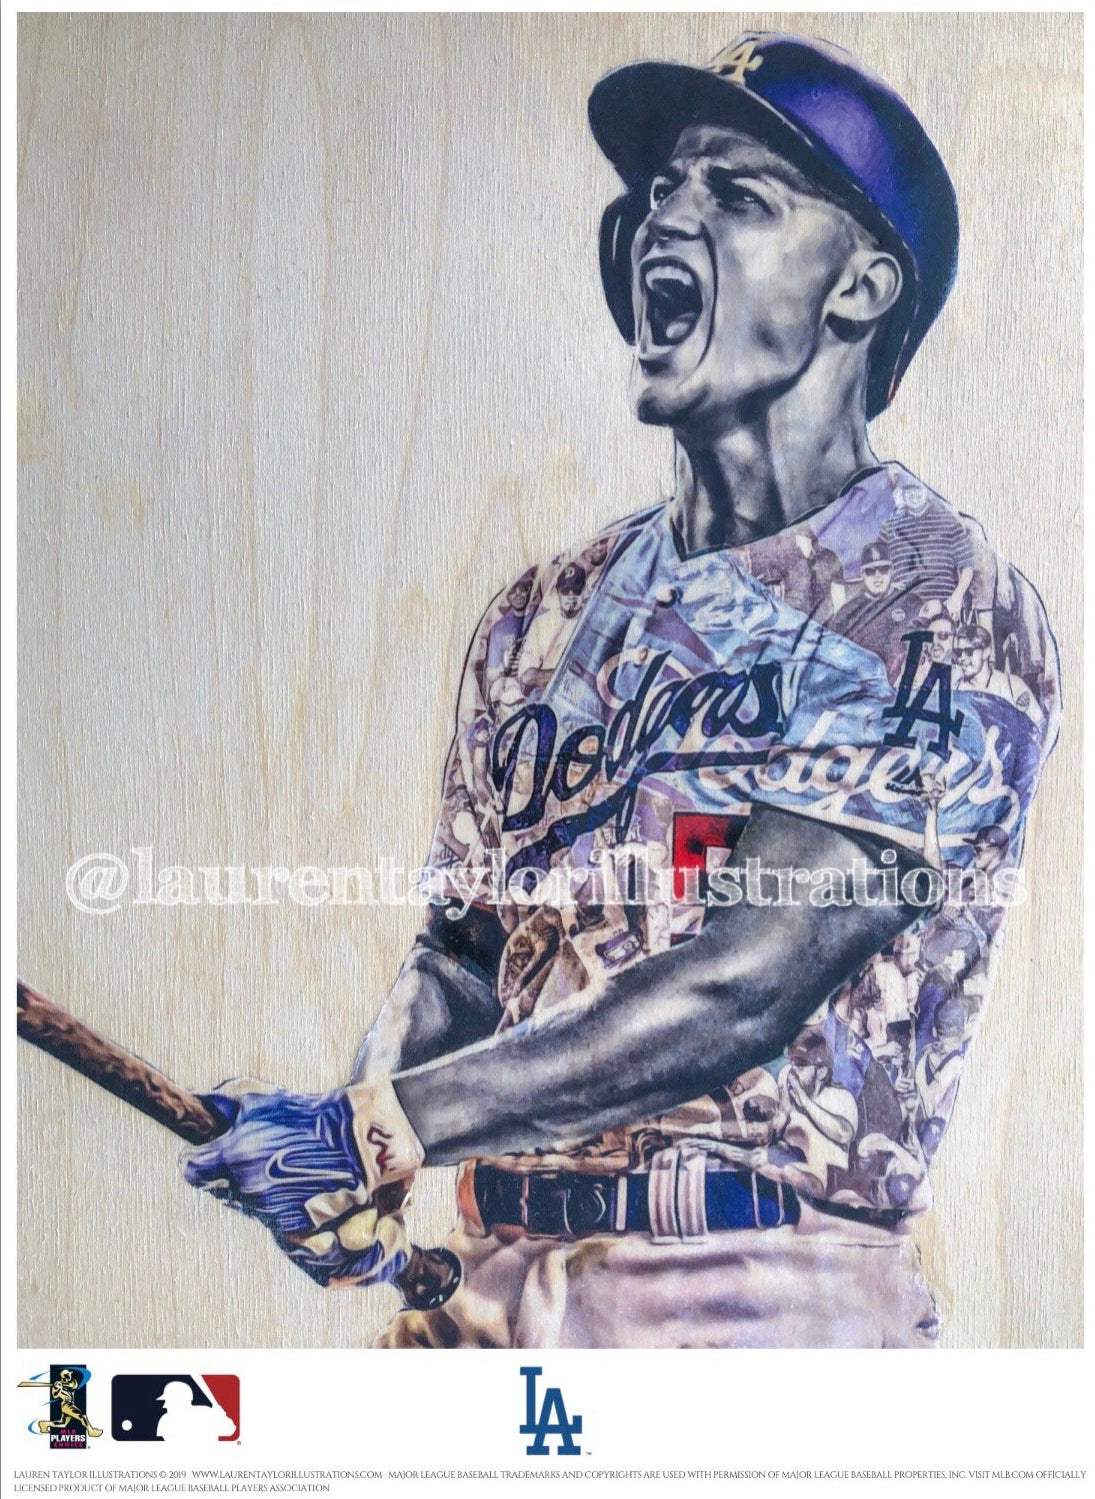 "C-Seag" (Corey Seager) Los Angeles Dodgers - Officially Licensed MLB Print - BLUE SIGNATURE LIMITED RELEASE /5